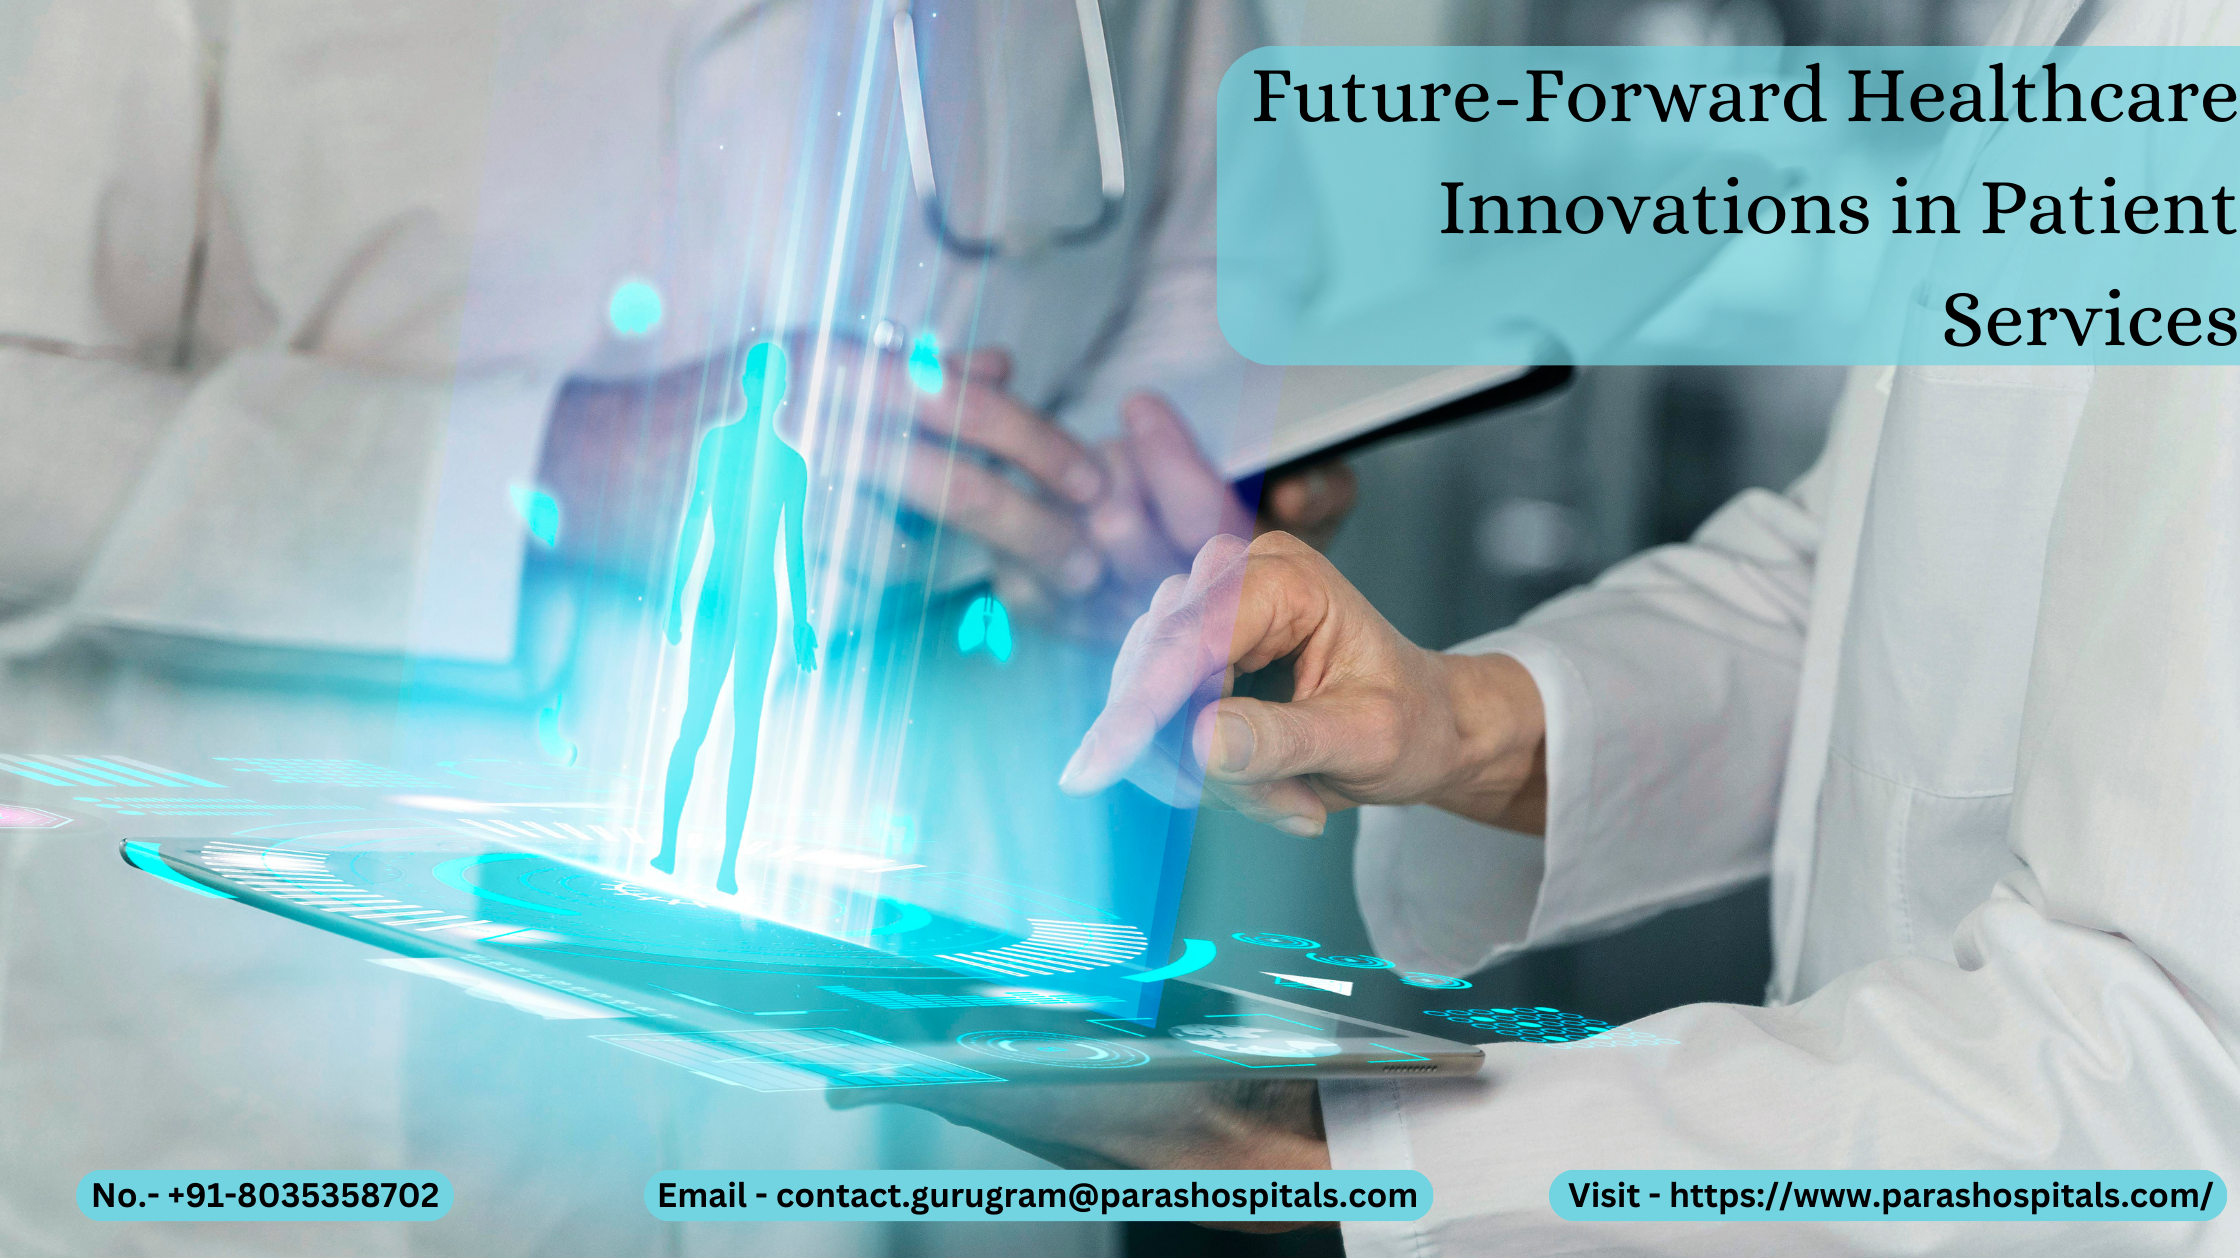 Future-Forward Healthcare Innovations in Patient Services